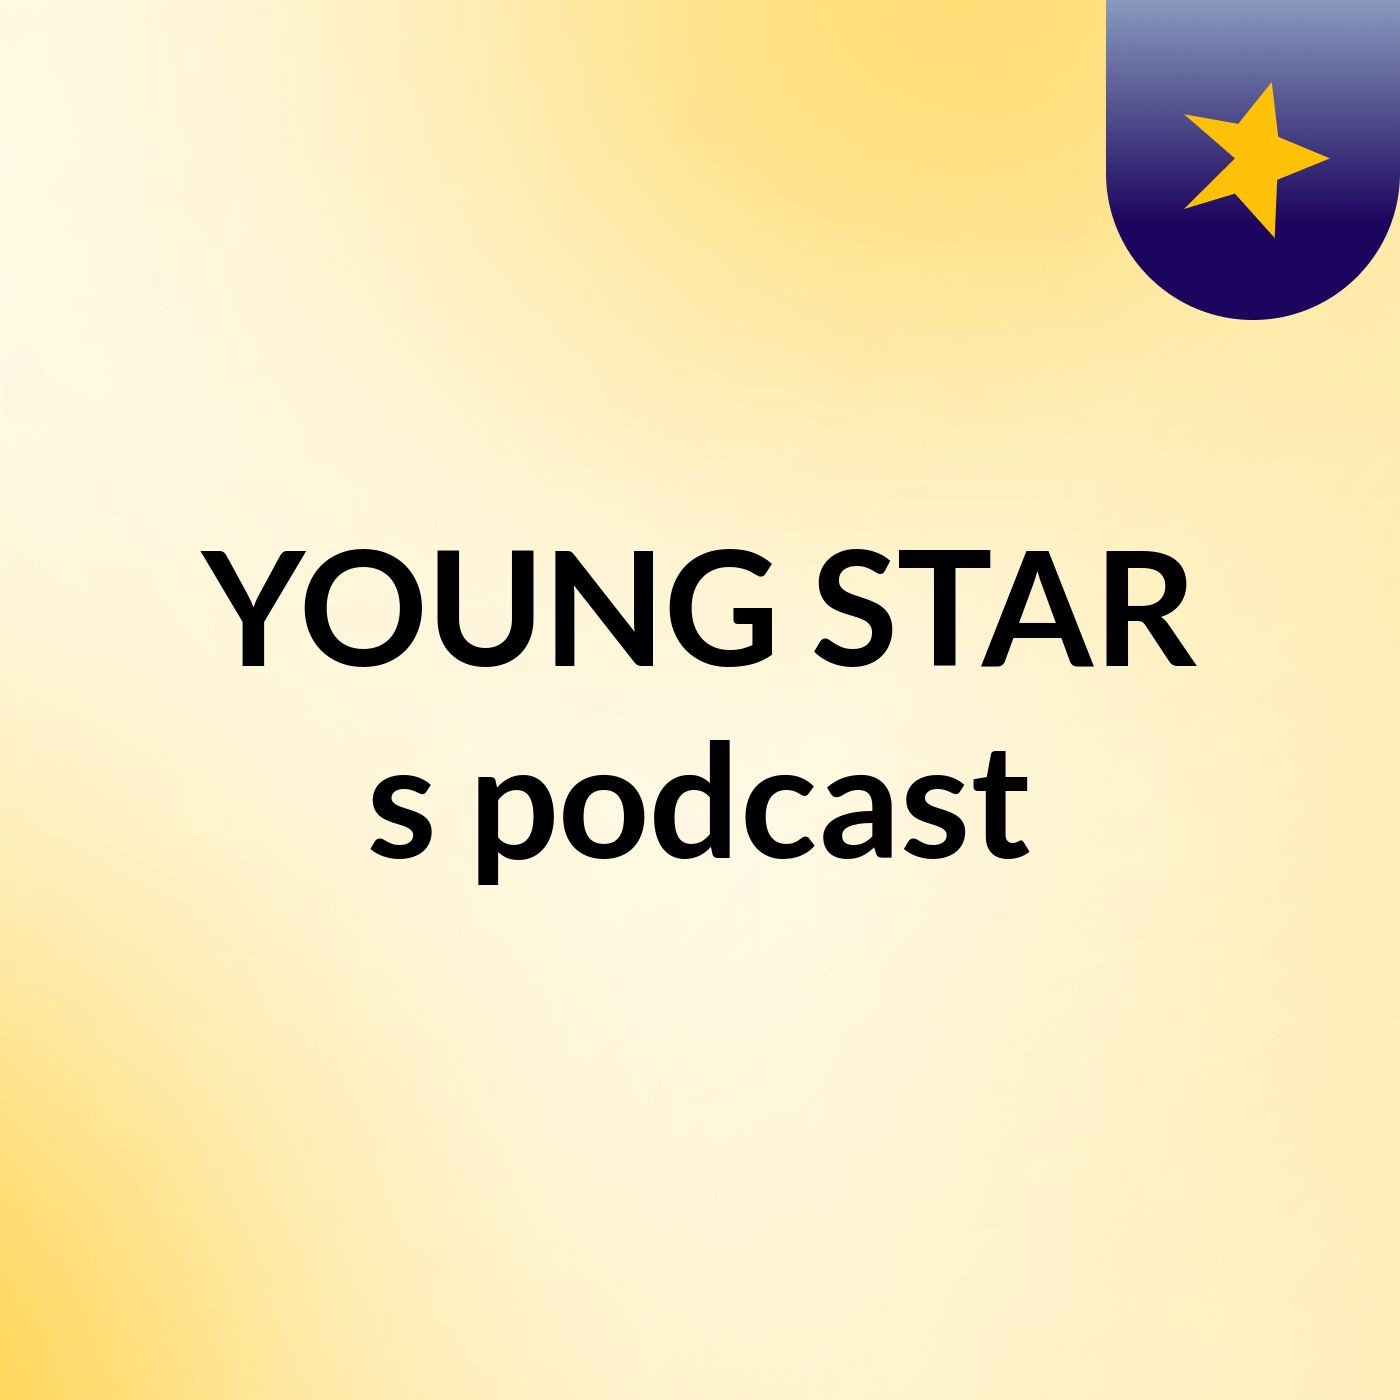 Episode 2 - YOUNG STAR's podcast